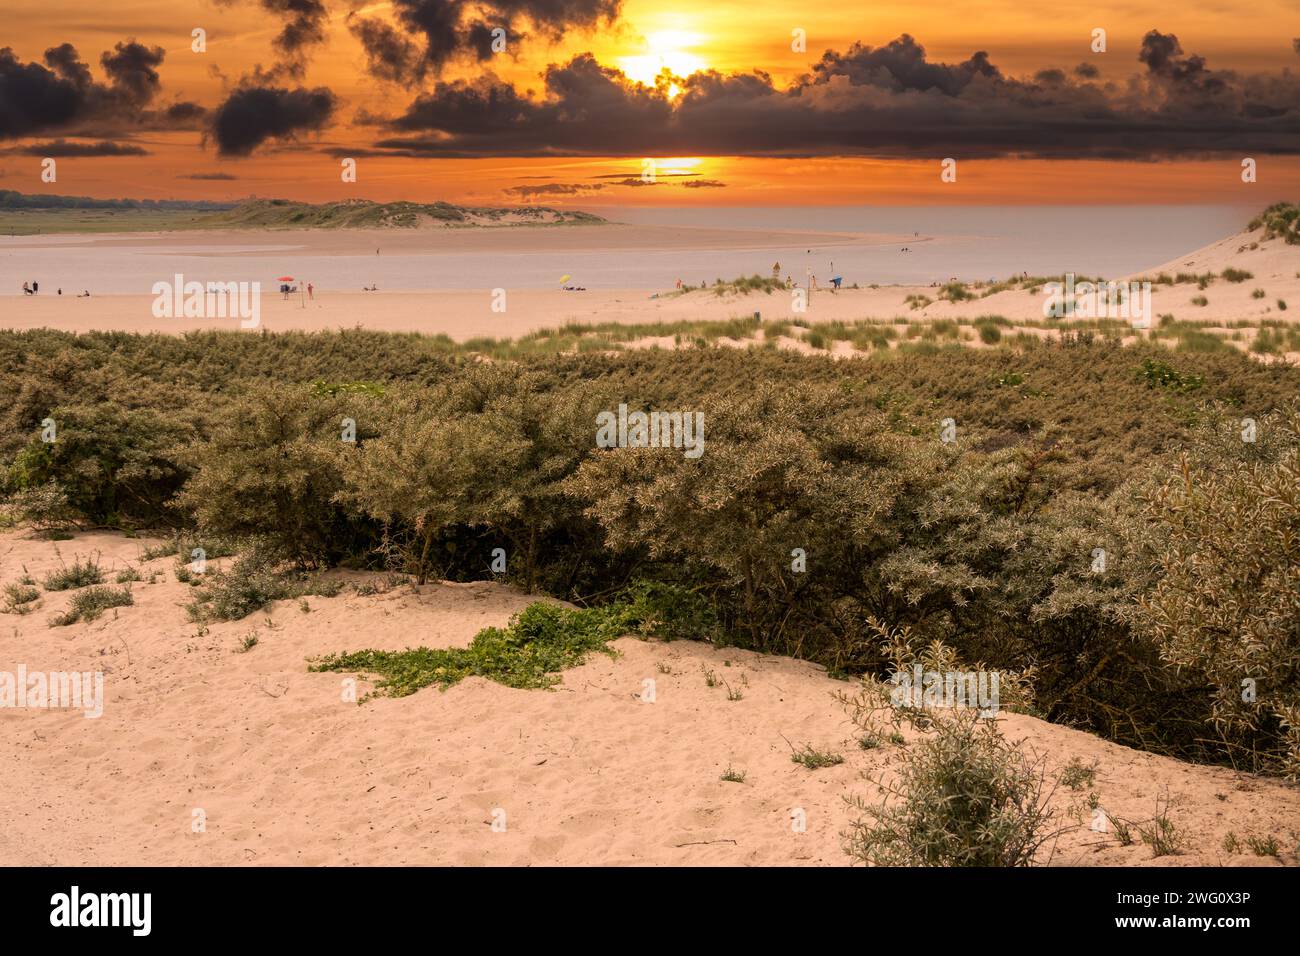 Dunes and beach of tidal inlet of The Zwin nature reserve at North Sea coast at sunset, at border between Belgium and the Netherlands Stock Photo